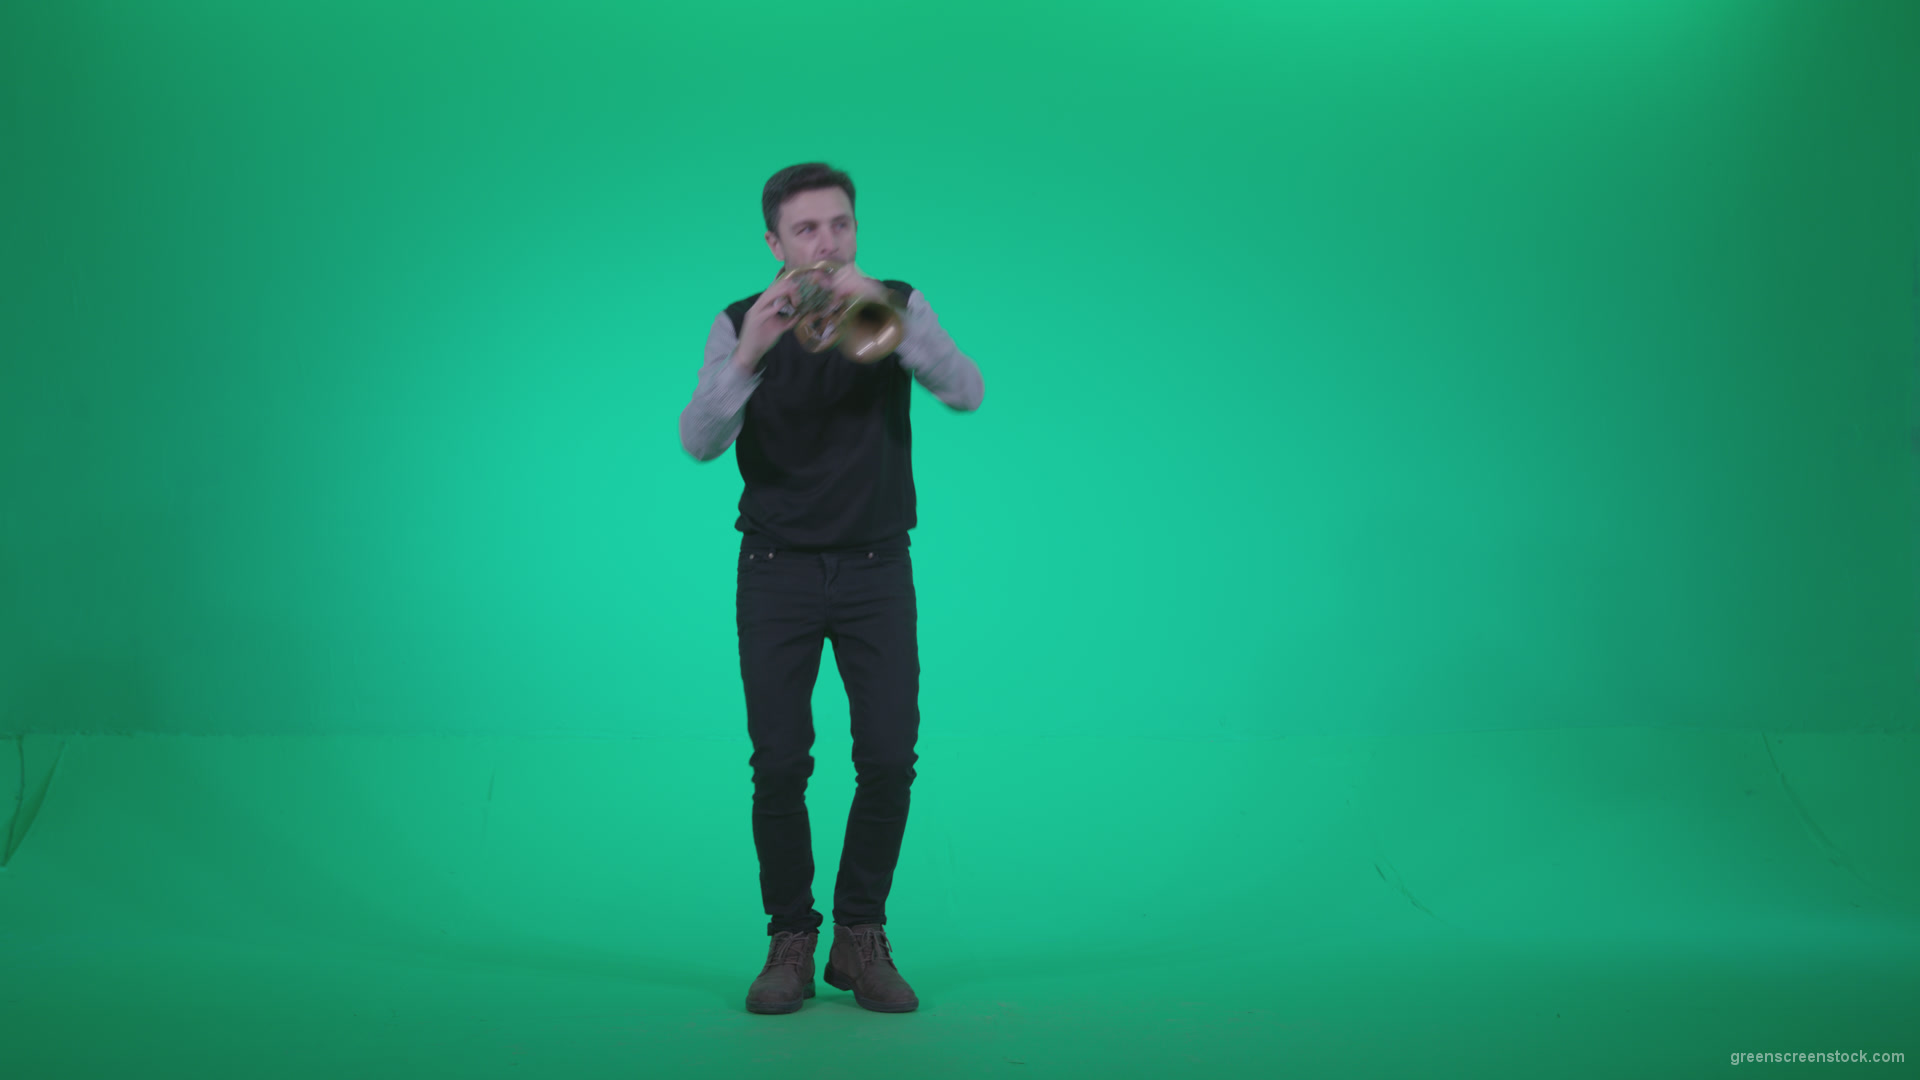 Gold-Trumpet-playing-2_002 Green Screen Stock